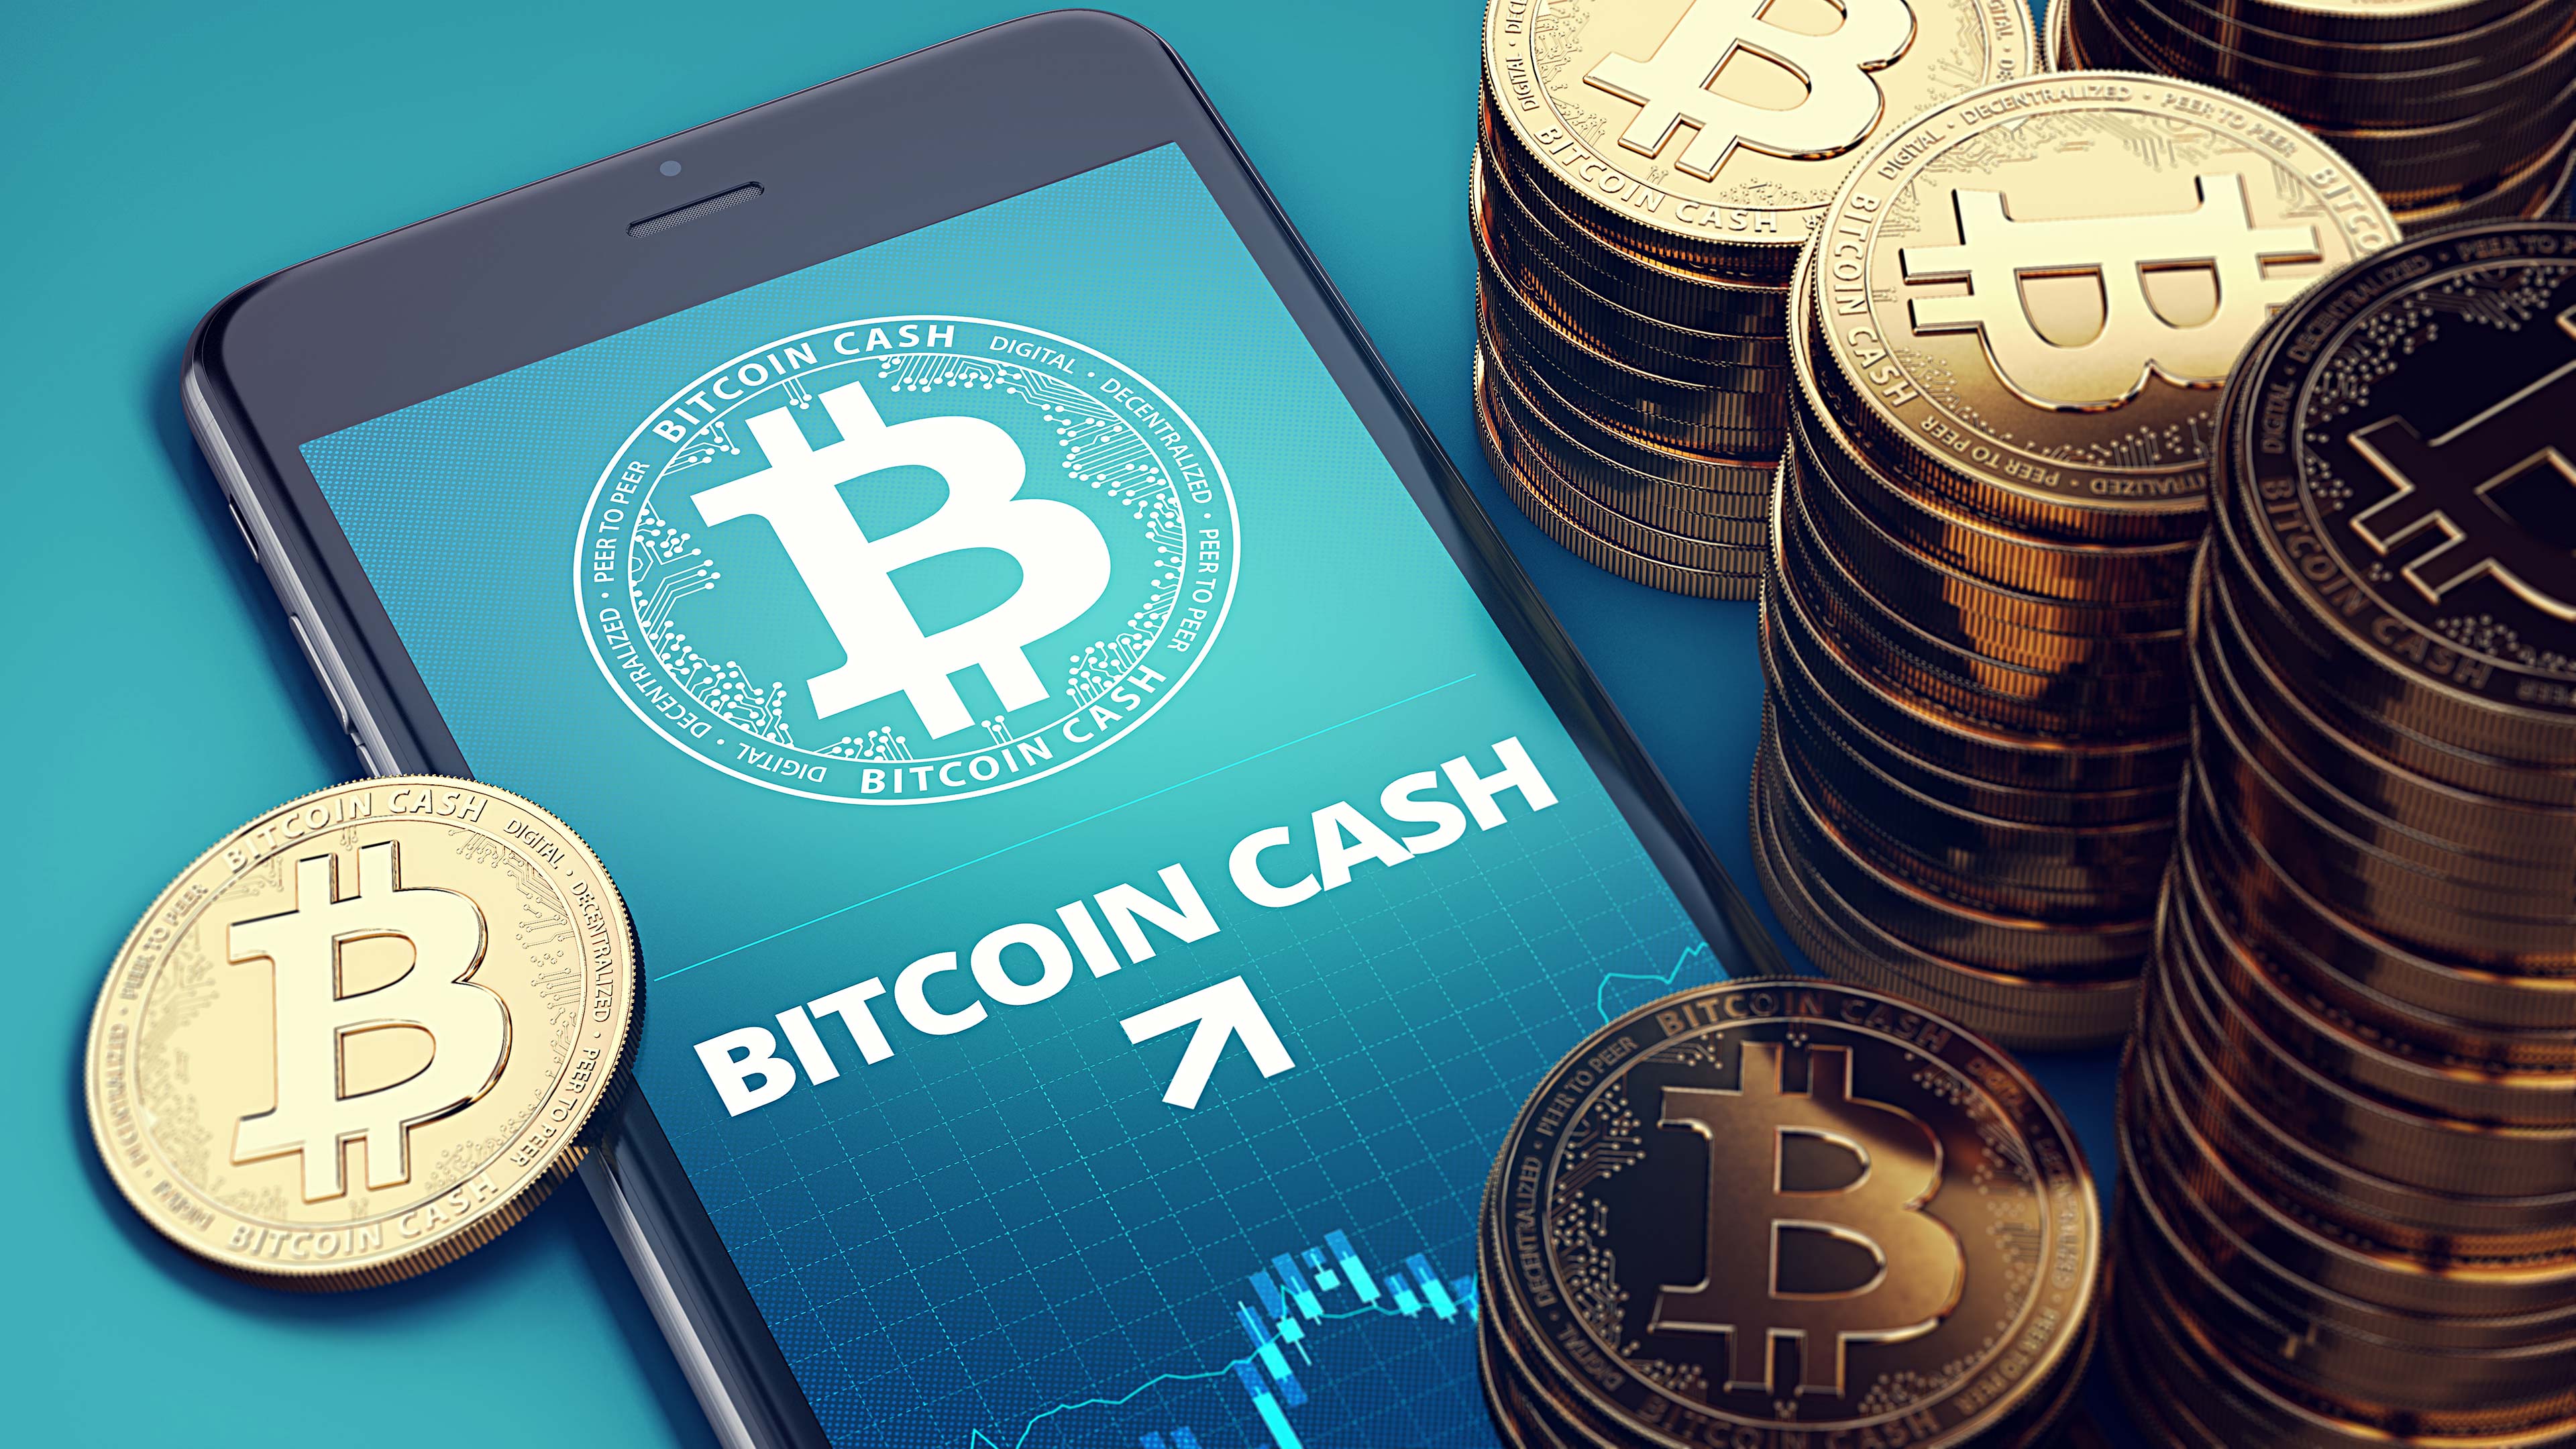 Top cryptocurrency — Bitcoin Cash